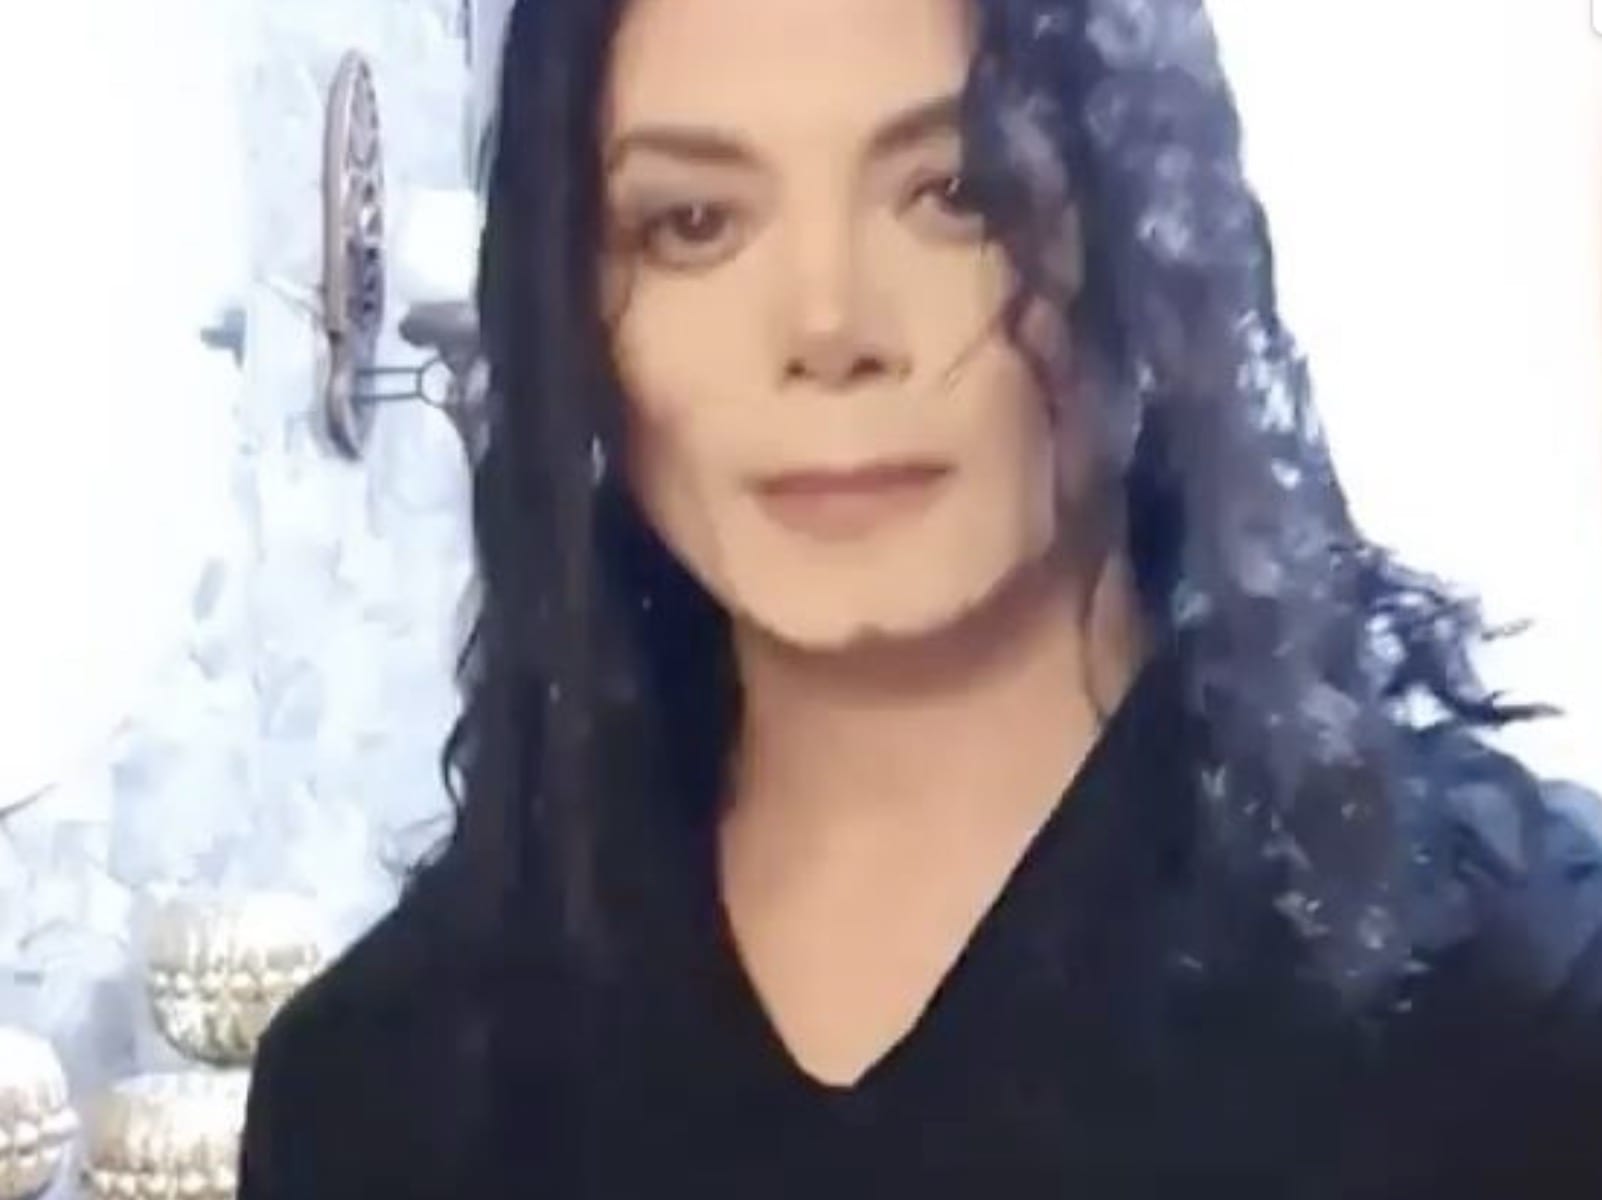 Watch: Ludacris Has Found The Most Accurate Michael Jackson Lookalike Of 20191602 x 1200